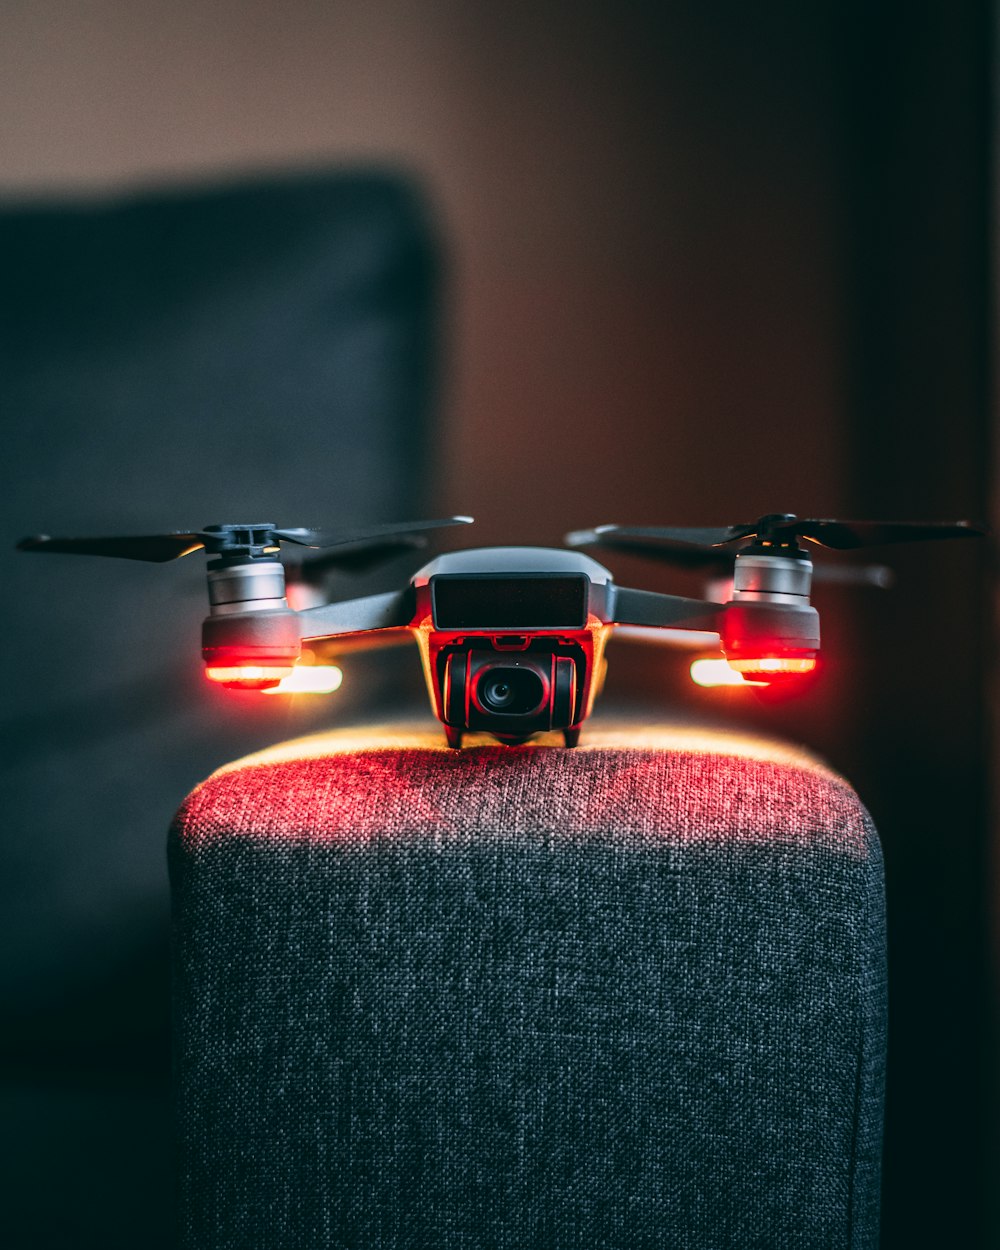 black and orange drone on brown textile